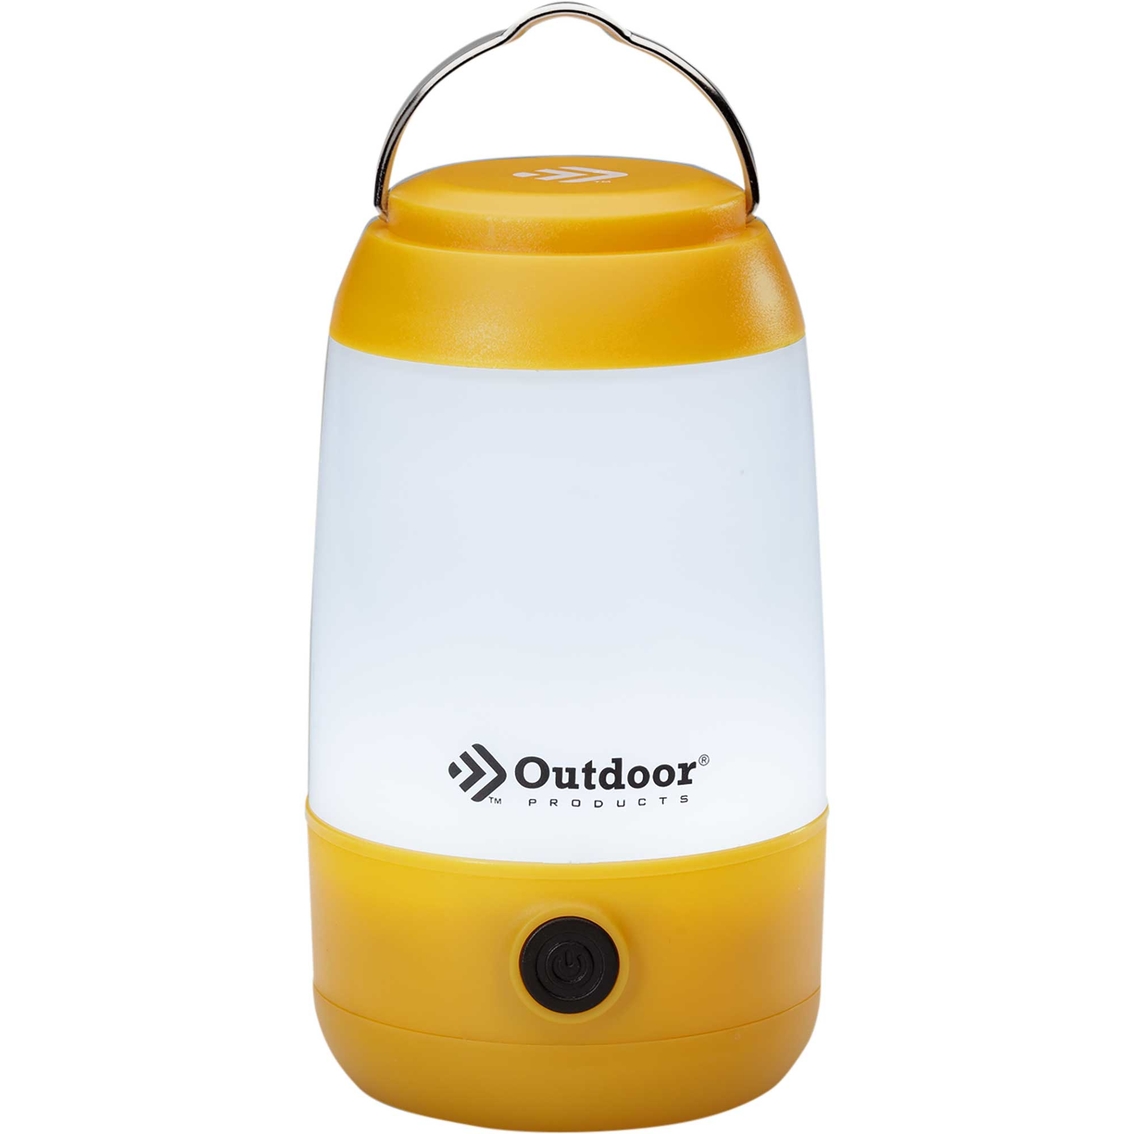 Outdoor Products 200L Compact Camp Lantern - Image 7 of 7